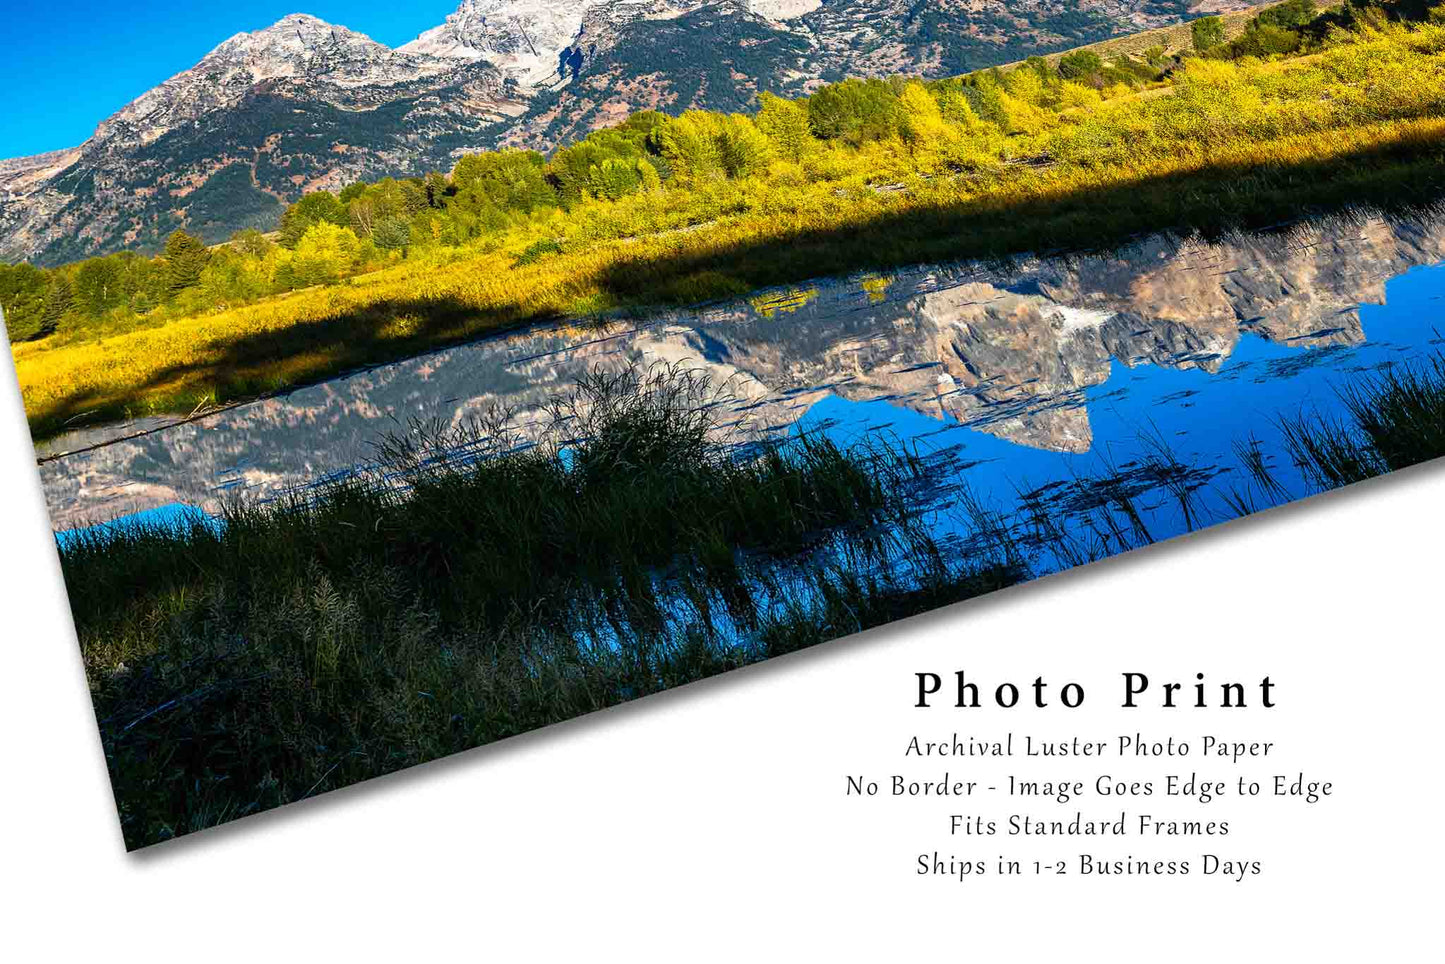 Grand Teton Photography Print | National Park Picture | Wyoming Wall Art | Rocky Mountain Photo| Nature Decor | Not Framed